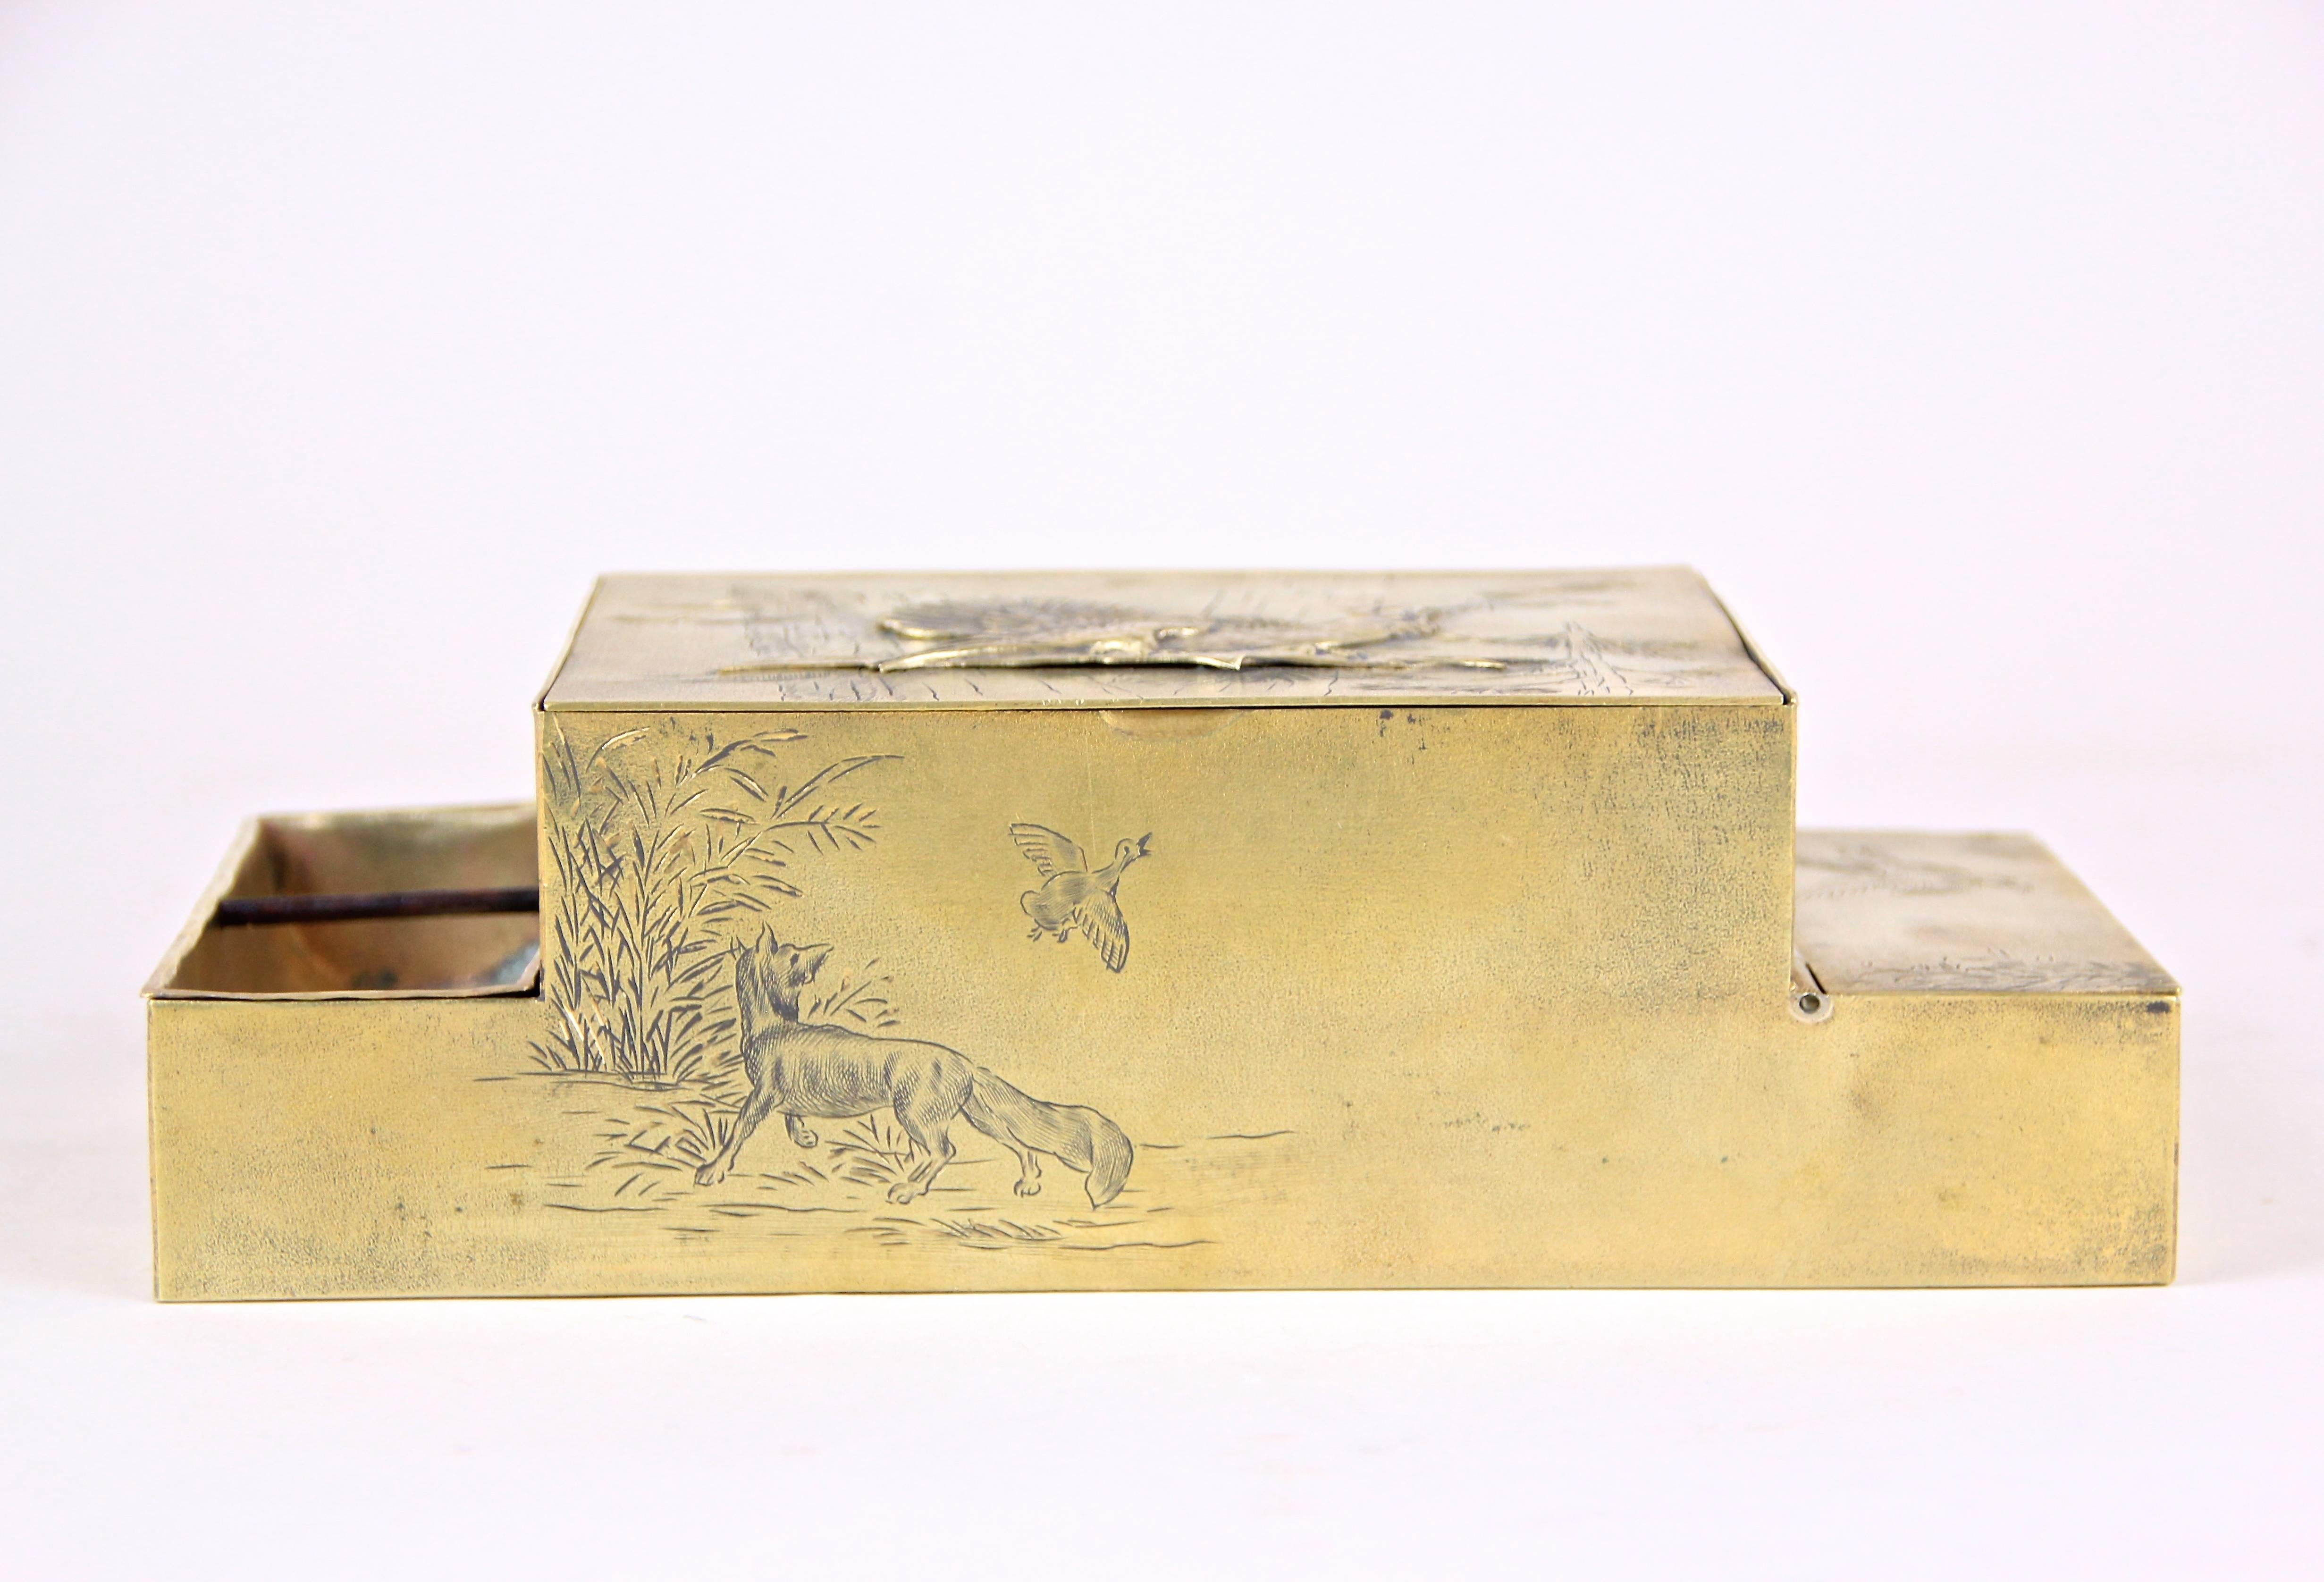 Lovely Art Nouveau tobacco or cigarette box from the early period, circa 1910 in good old Austria. This marvelous tobacco box was made of Fine brass and comes with a big paneled compartment for tobacco or cigarettes in the center, a removable little